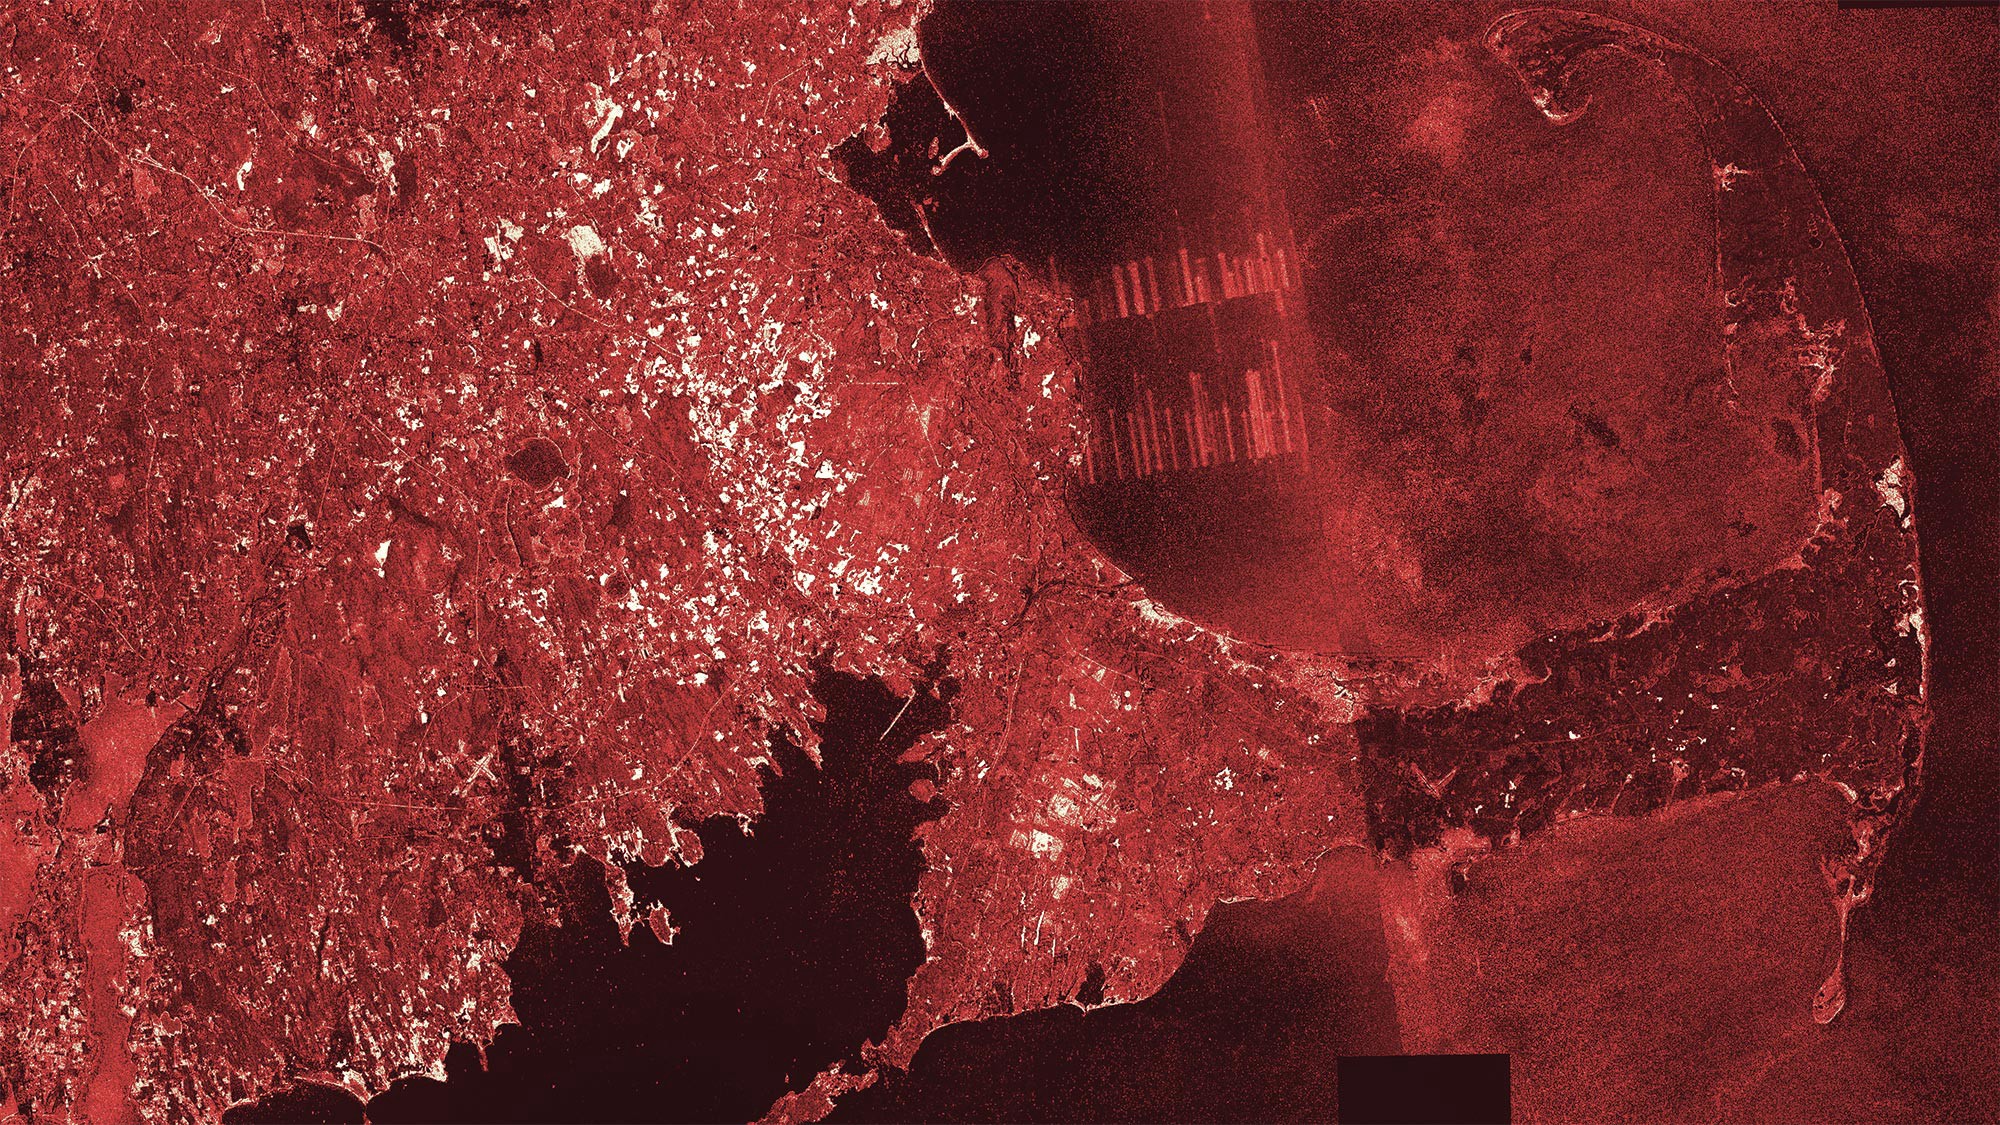 We delineated cranberry bogs across the United States by building a machine learning classifier using synthetic aperture radar (SAR) data from the European Space Agency’s Sentinel-1 satellite. This raw probability map over Massachusetts (with a cranberry colormap!) reveals the most likely locations of cranberry bogs (shown in bright white) as well as signal artifacts in radar data, scene boundaries and very bog-like coastal wetlands.